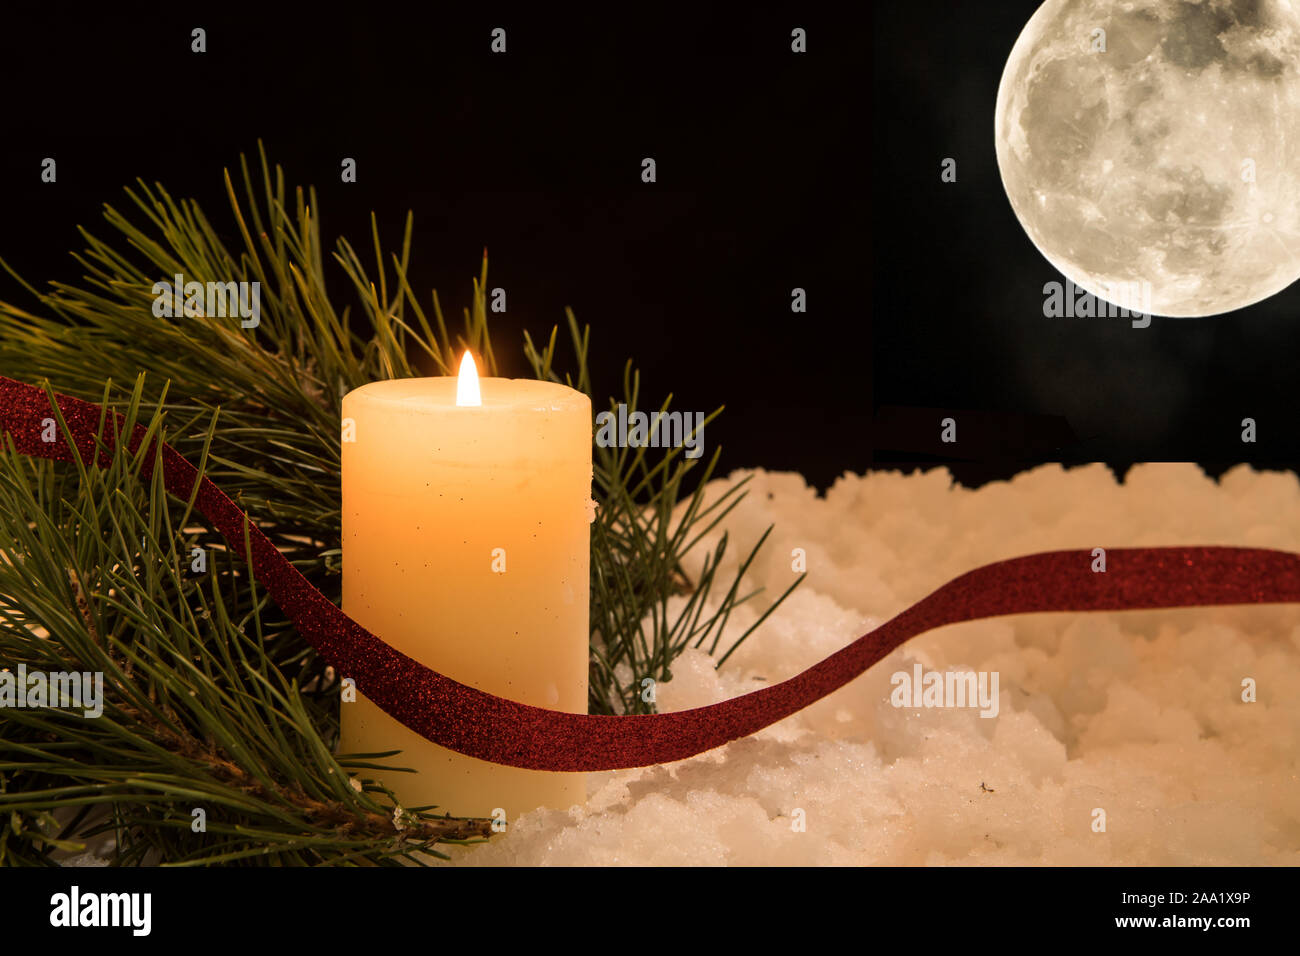 lit white candle and  pine needles in moonshine in snow. Black Christmas Background with warm holiday theme. Stock Photo